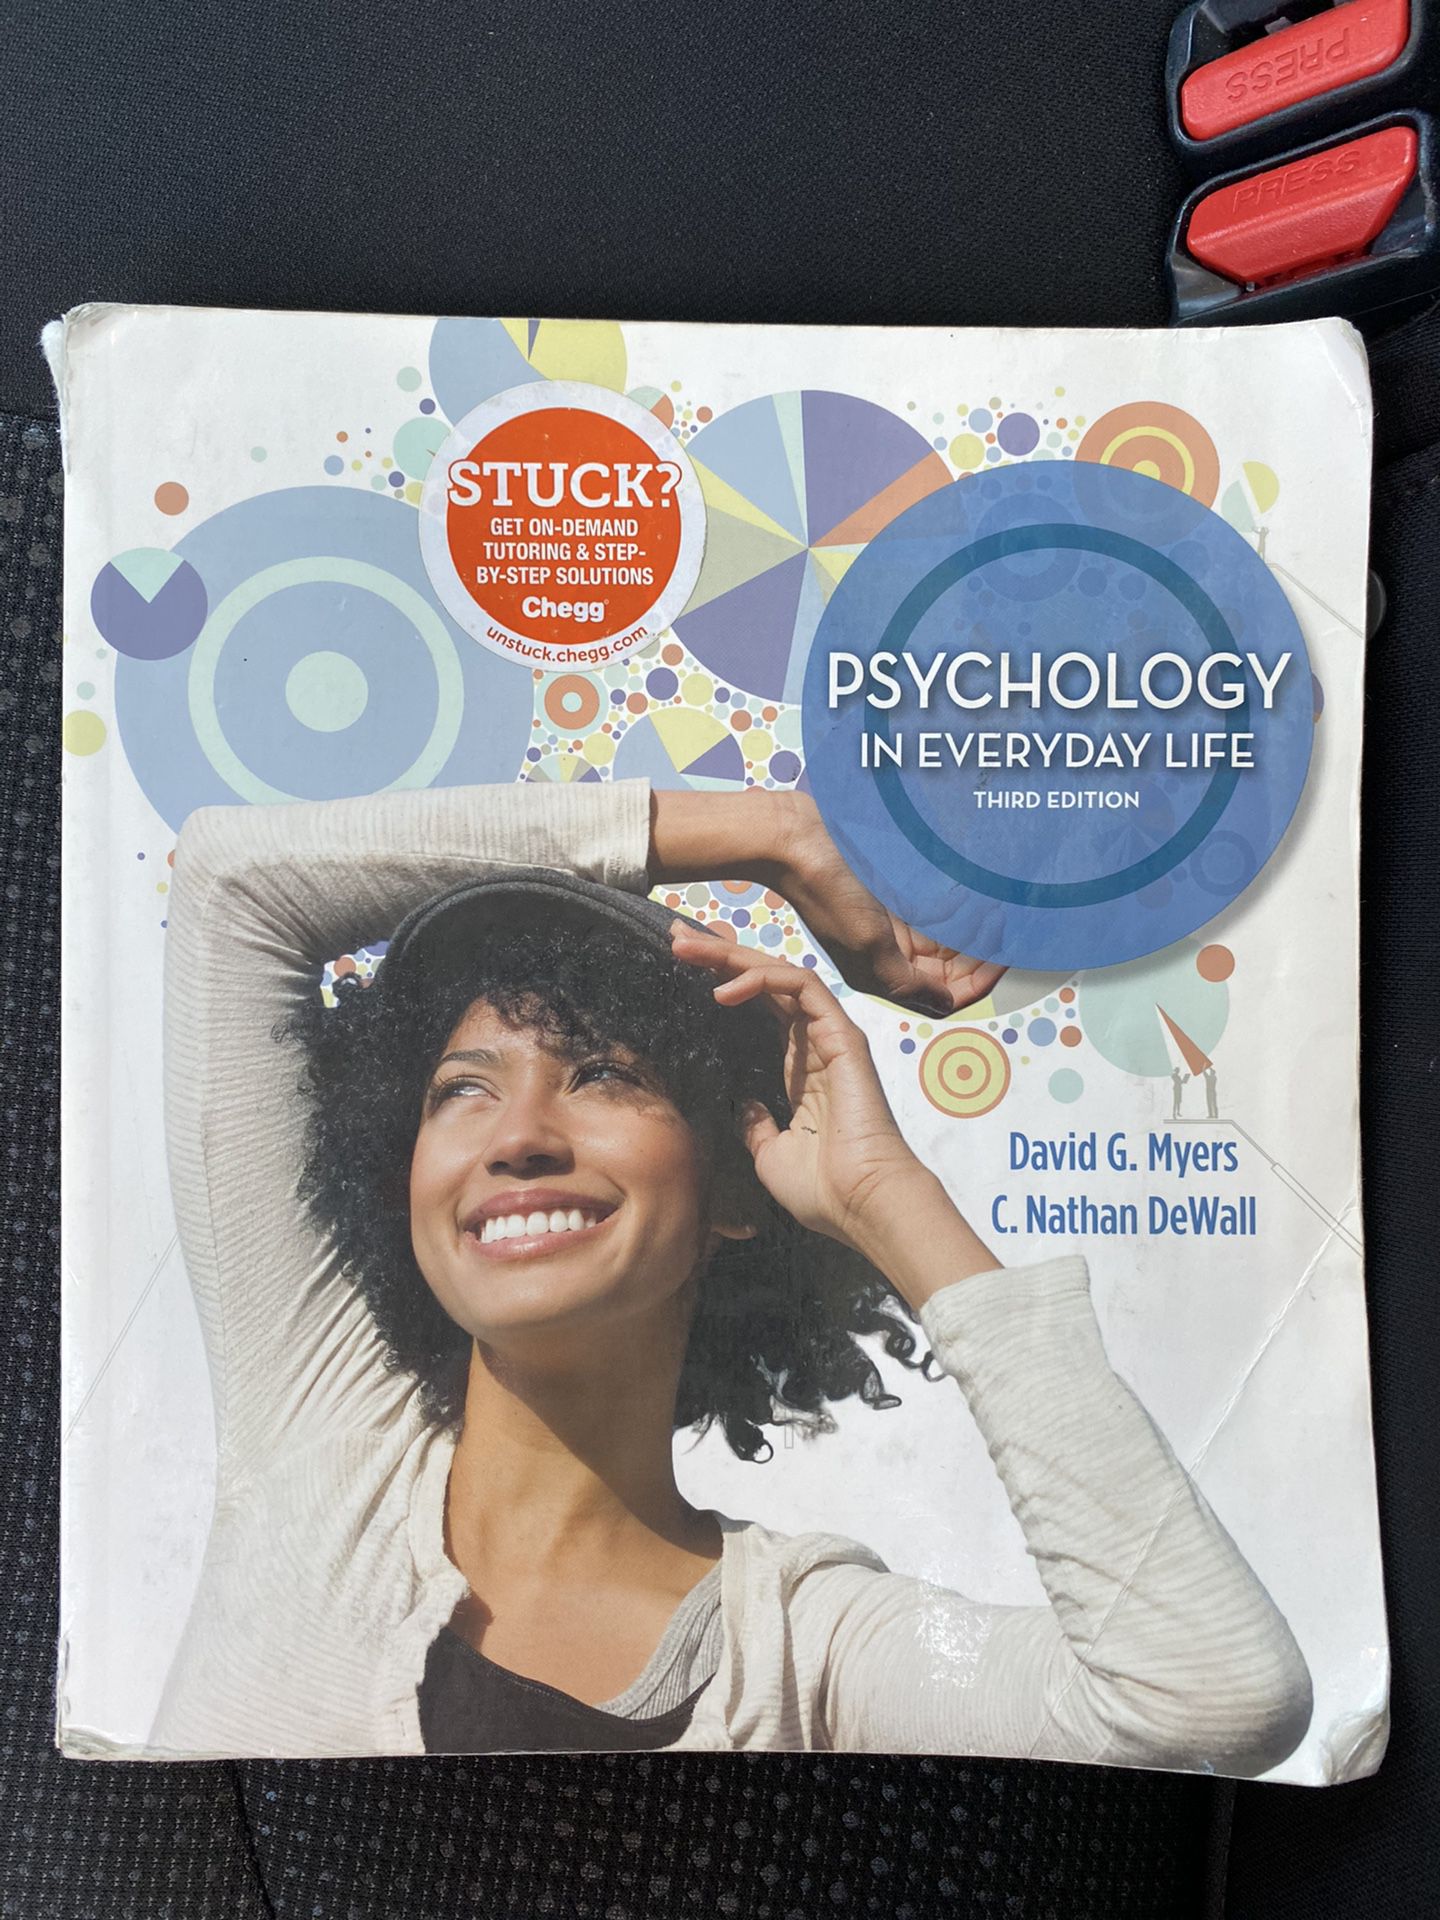 Psychology in everyday life 3rd edition